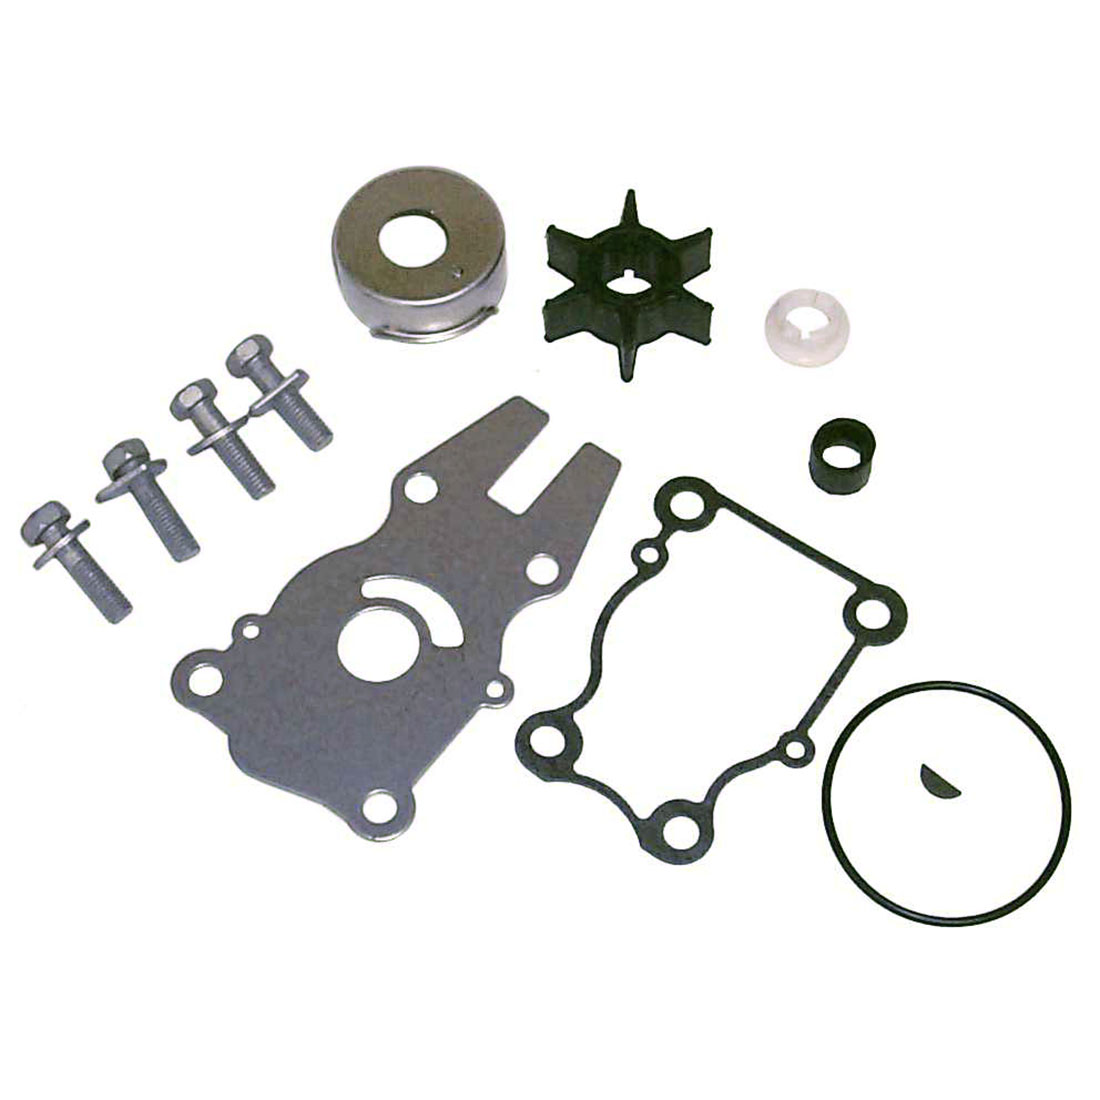 Water Pump Kit for Yamaha Outboards 40 50 60 HP 63D-W0078-01-00